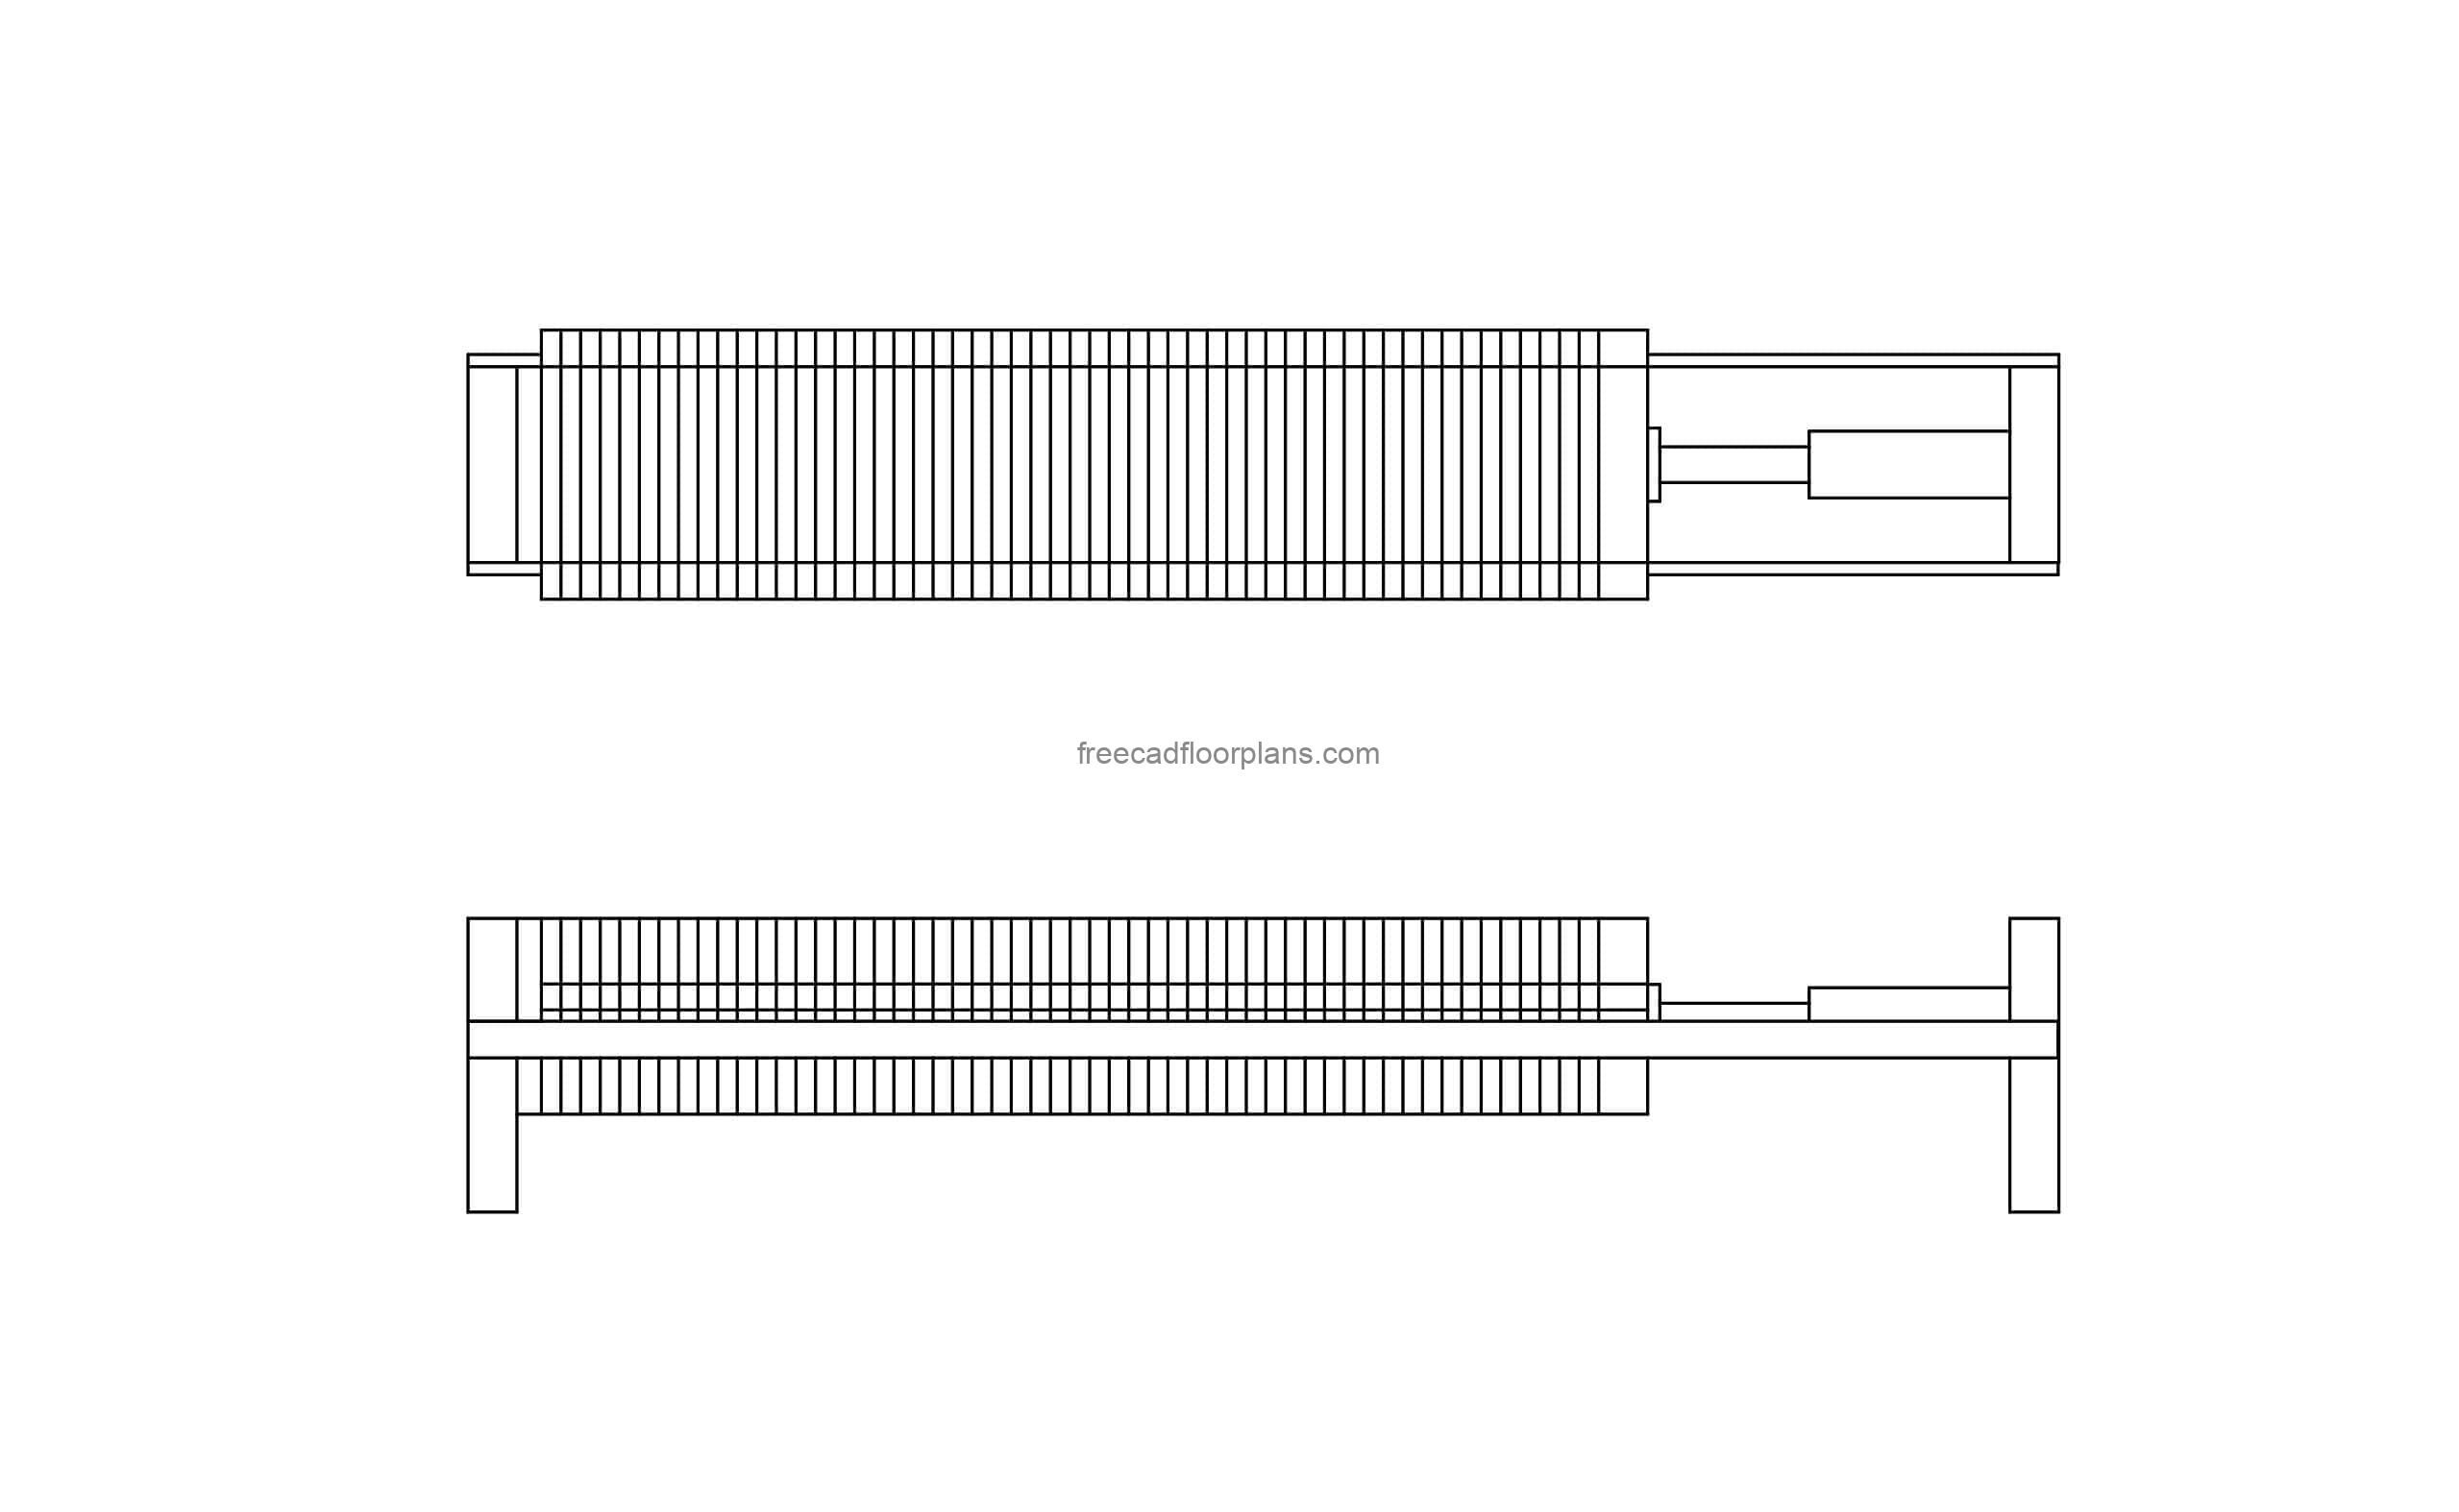 filter press cad block drawing in dwg format file for free download 2D views